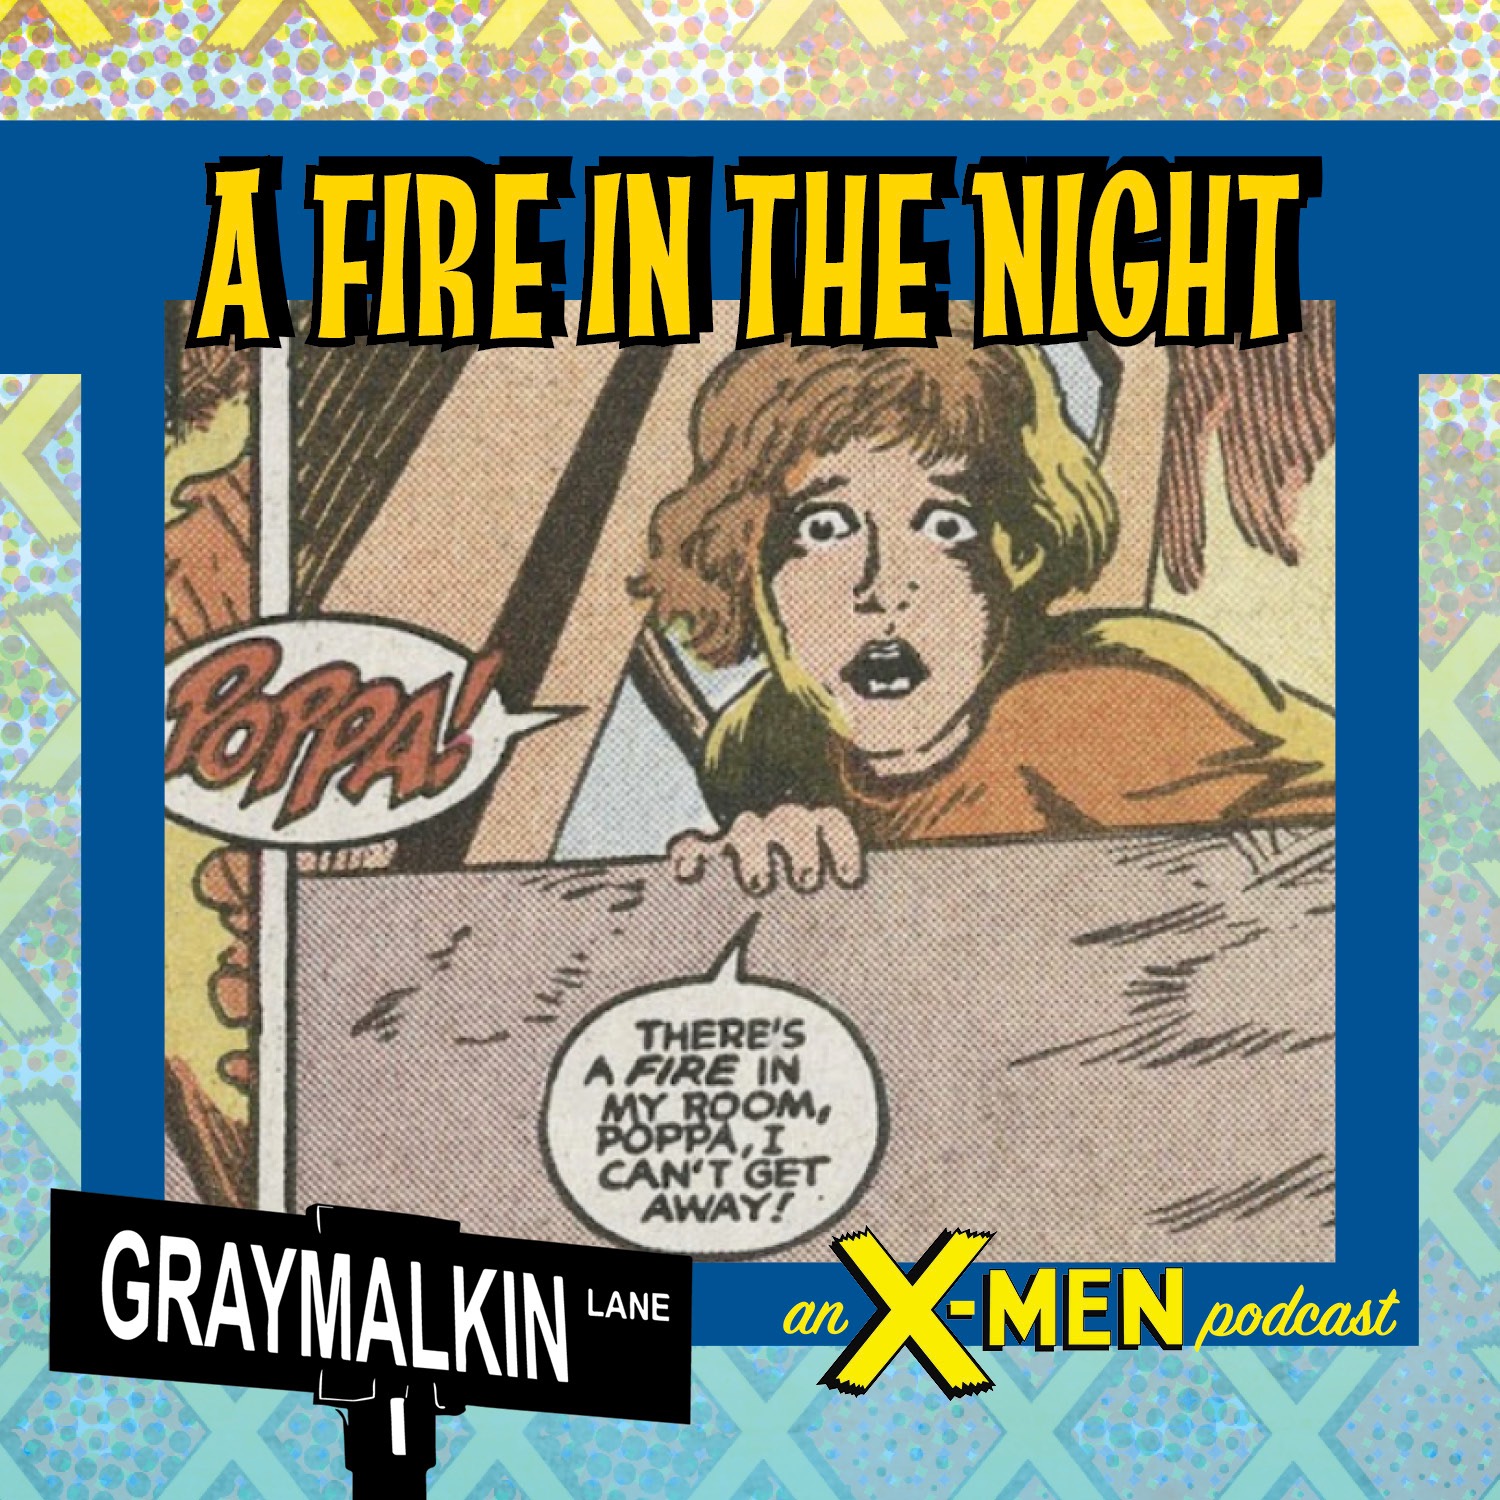 Classic X-Men 12/2: A Fire in the Night! Featuring Sabir Pirzada and Connor Goldsmith! Then Classic X-Men 19/2: I, Magneto! Featuring Maureen Burdock, Seth Martel, and Kendra Boileau!